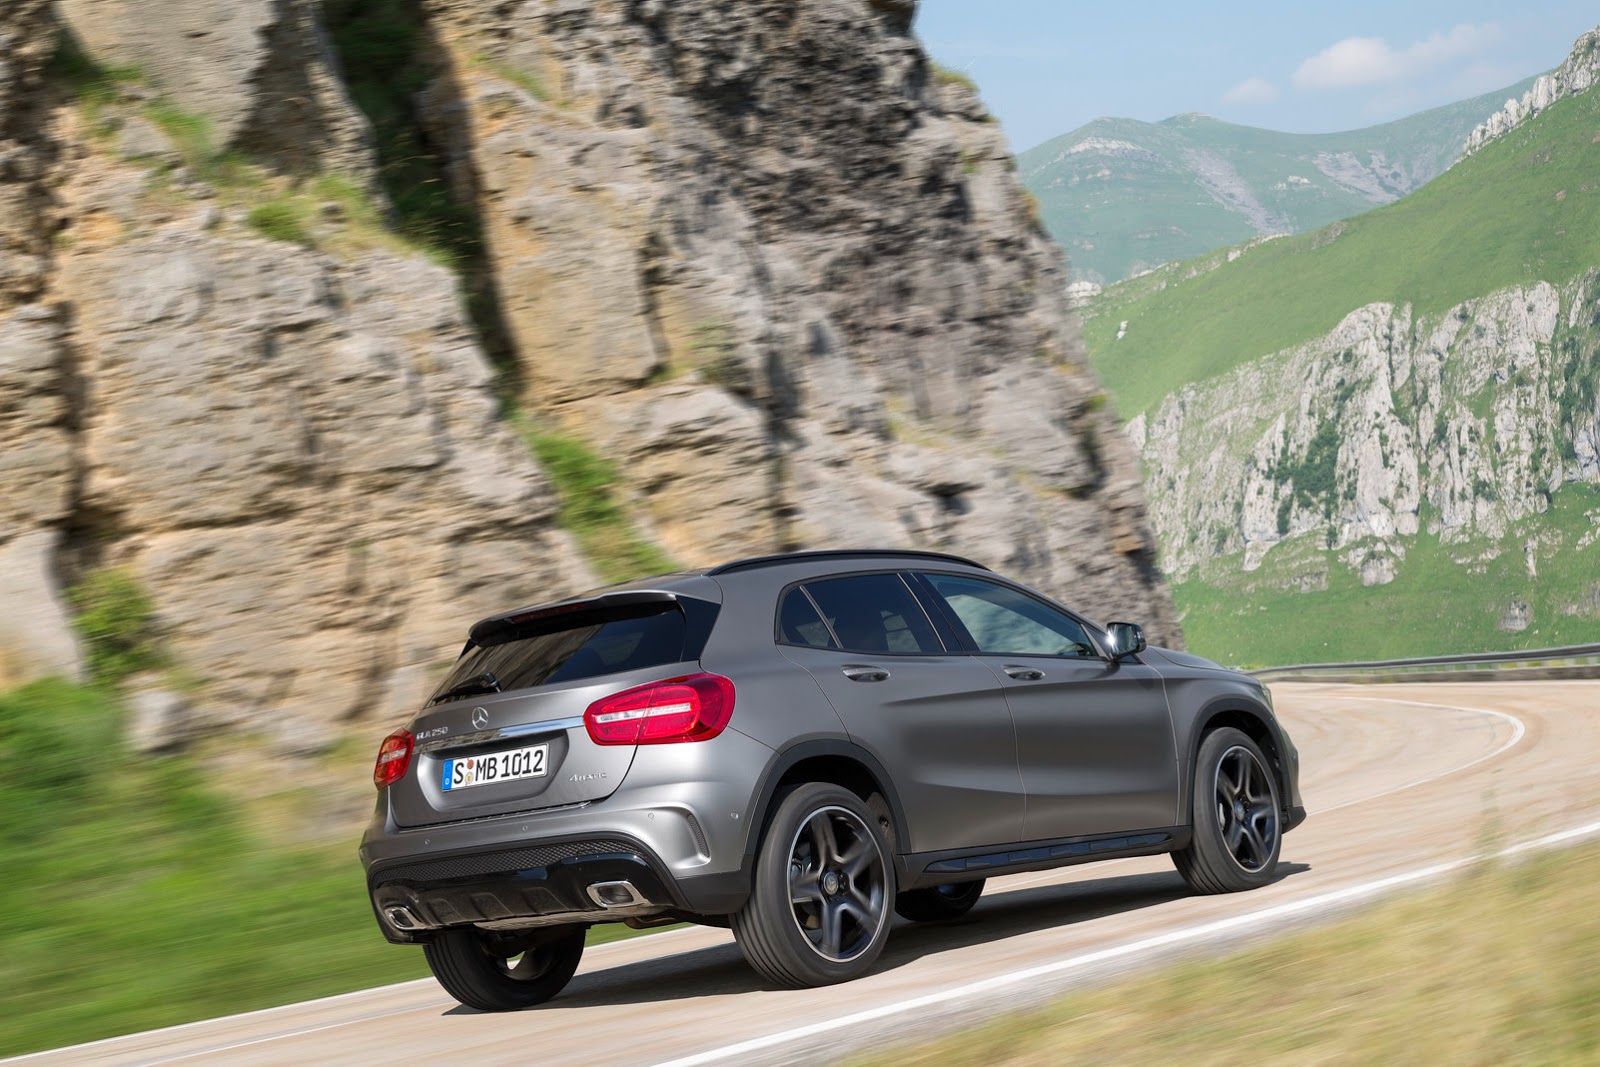 New 2015 Mercedes GLA Compact SUV from $31,300* in the U.S. | Carscoops